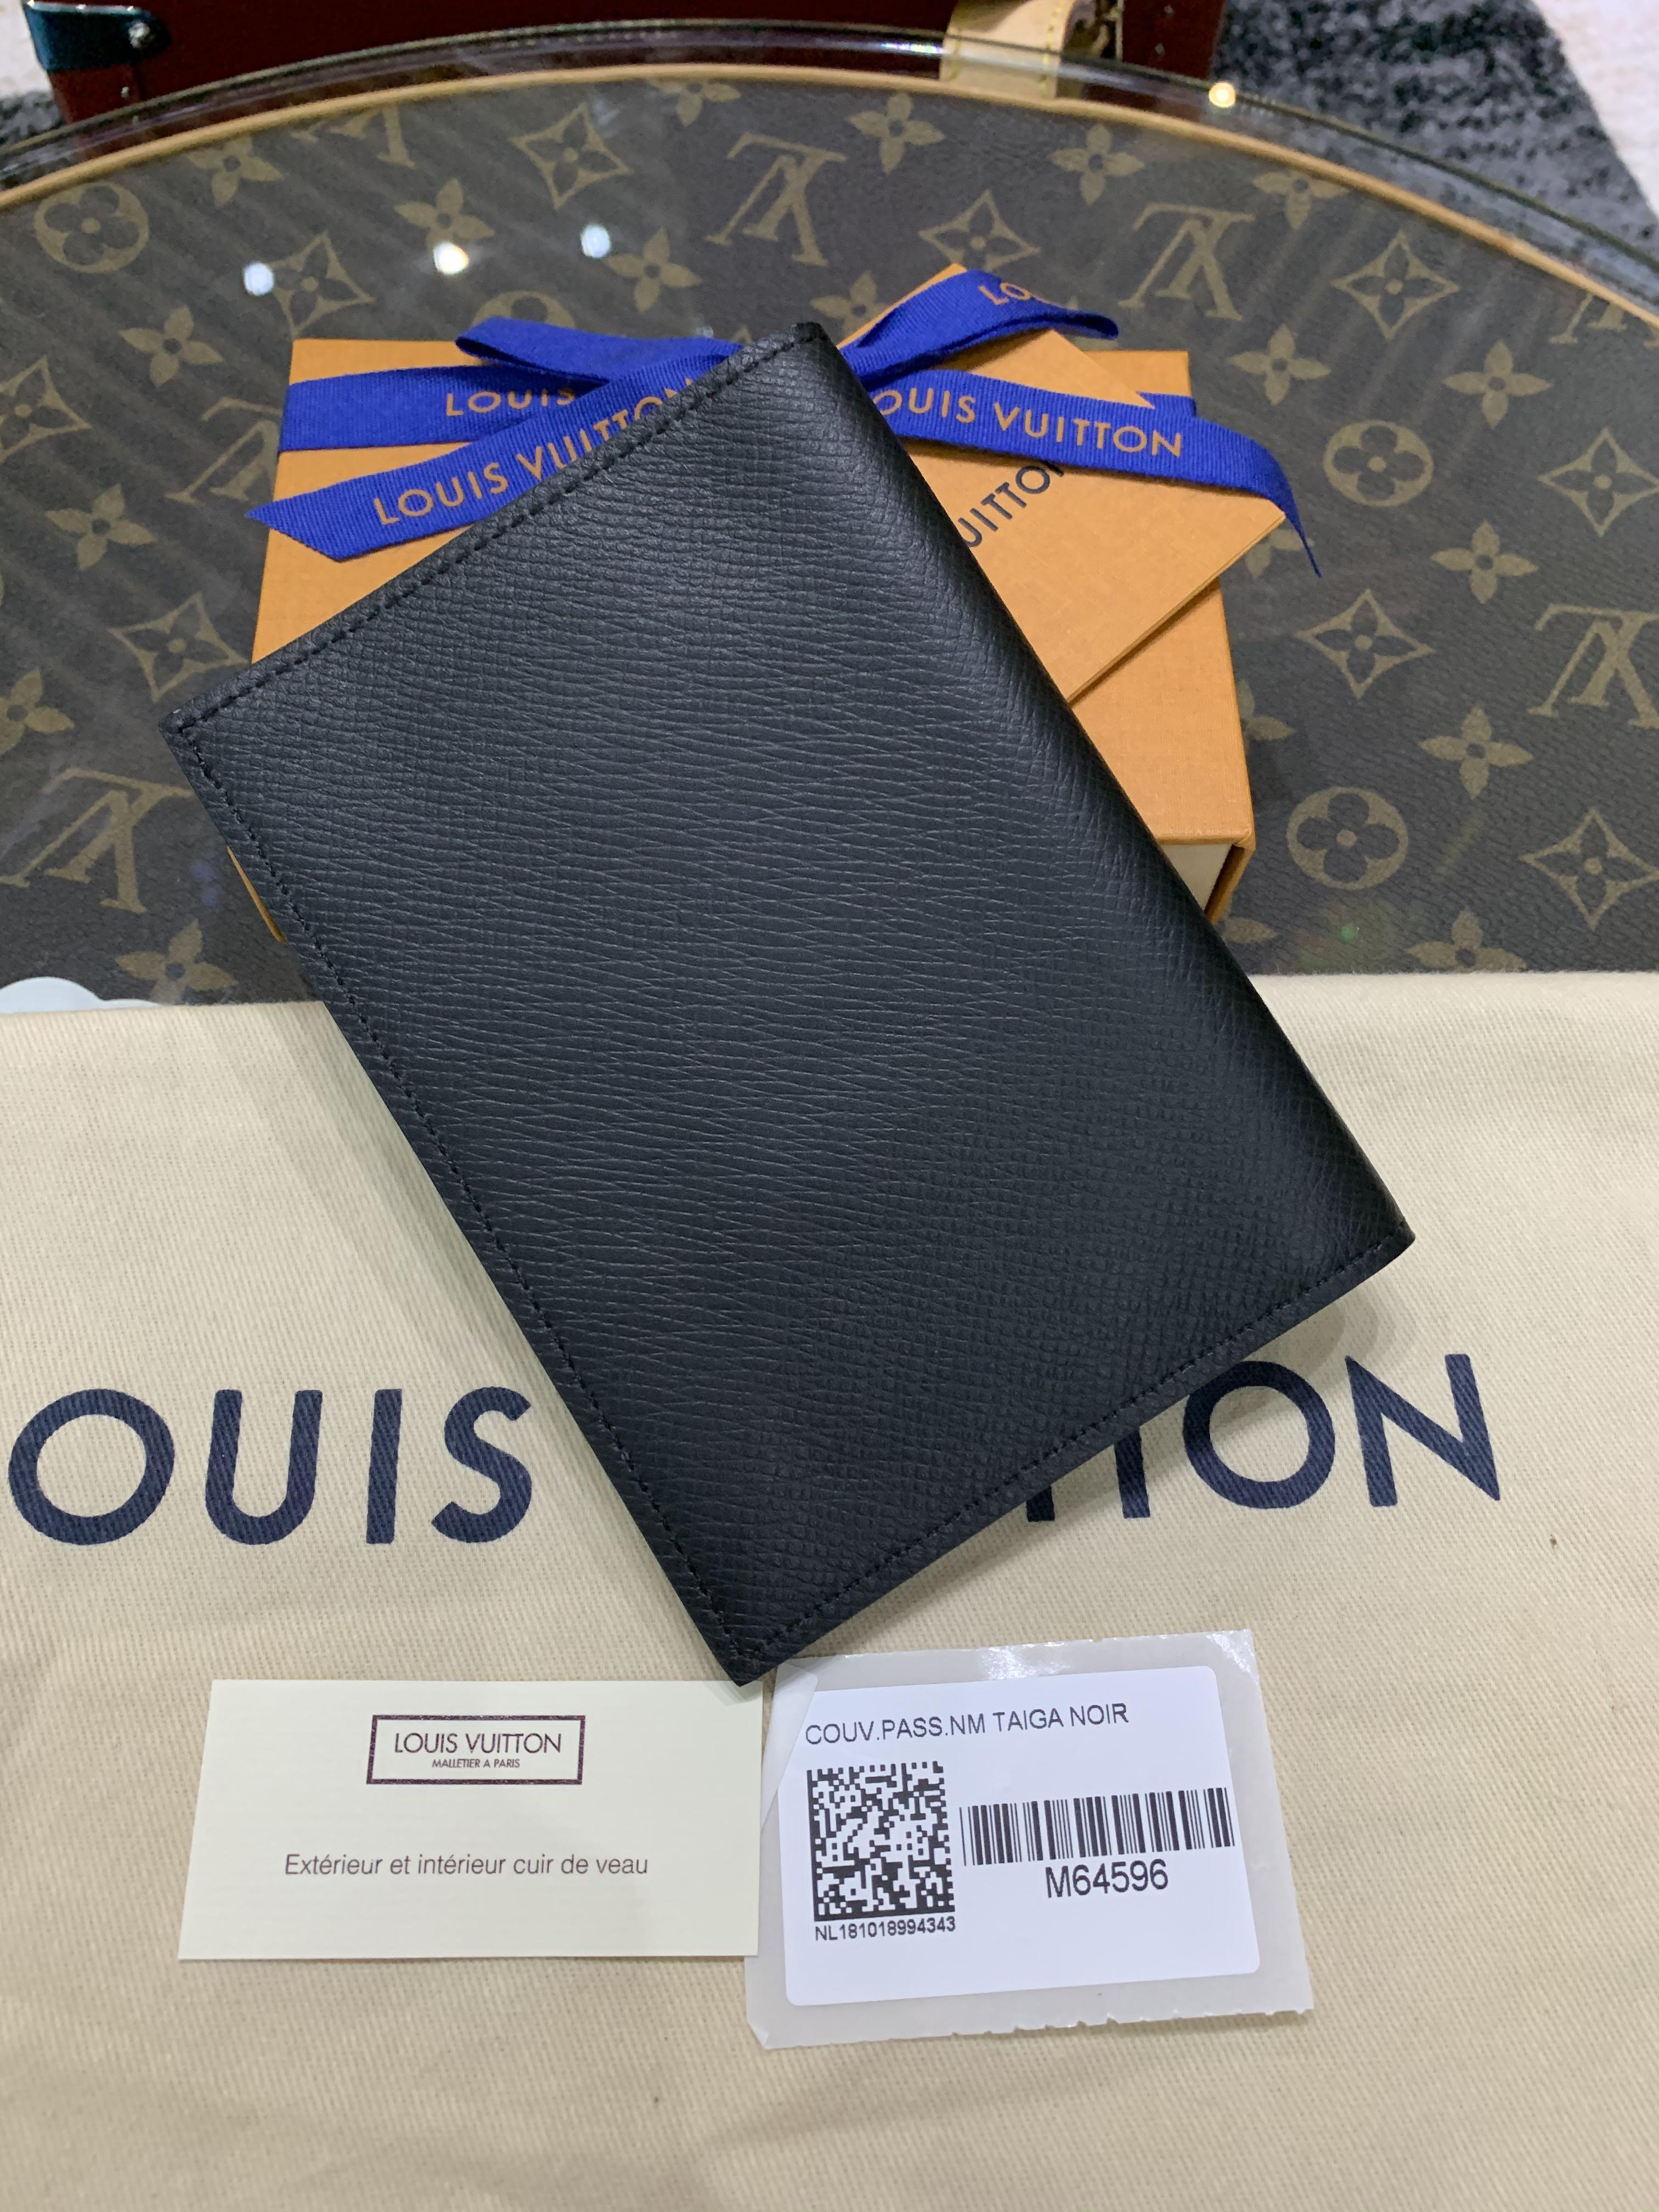 Shop Louis Vuitton TAIGA Passport cover (M64596) by sunnyfunny